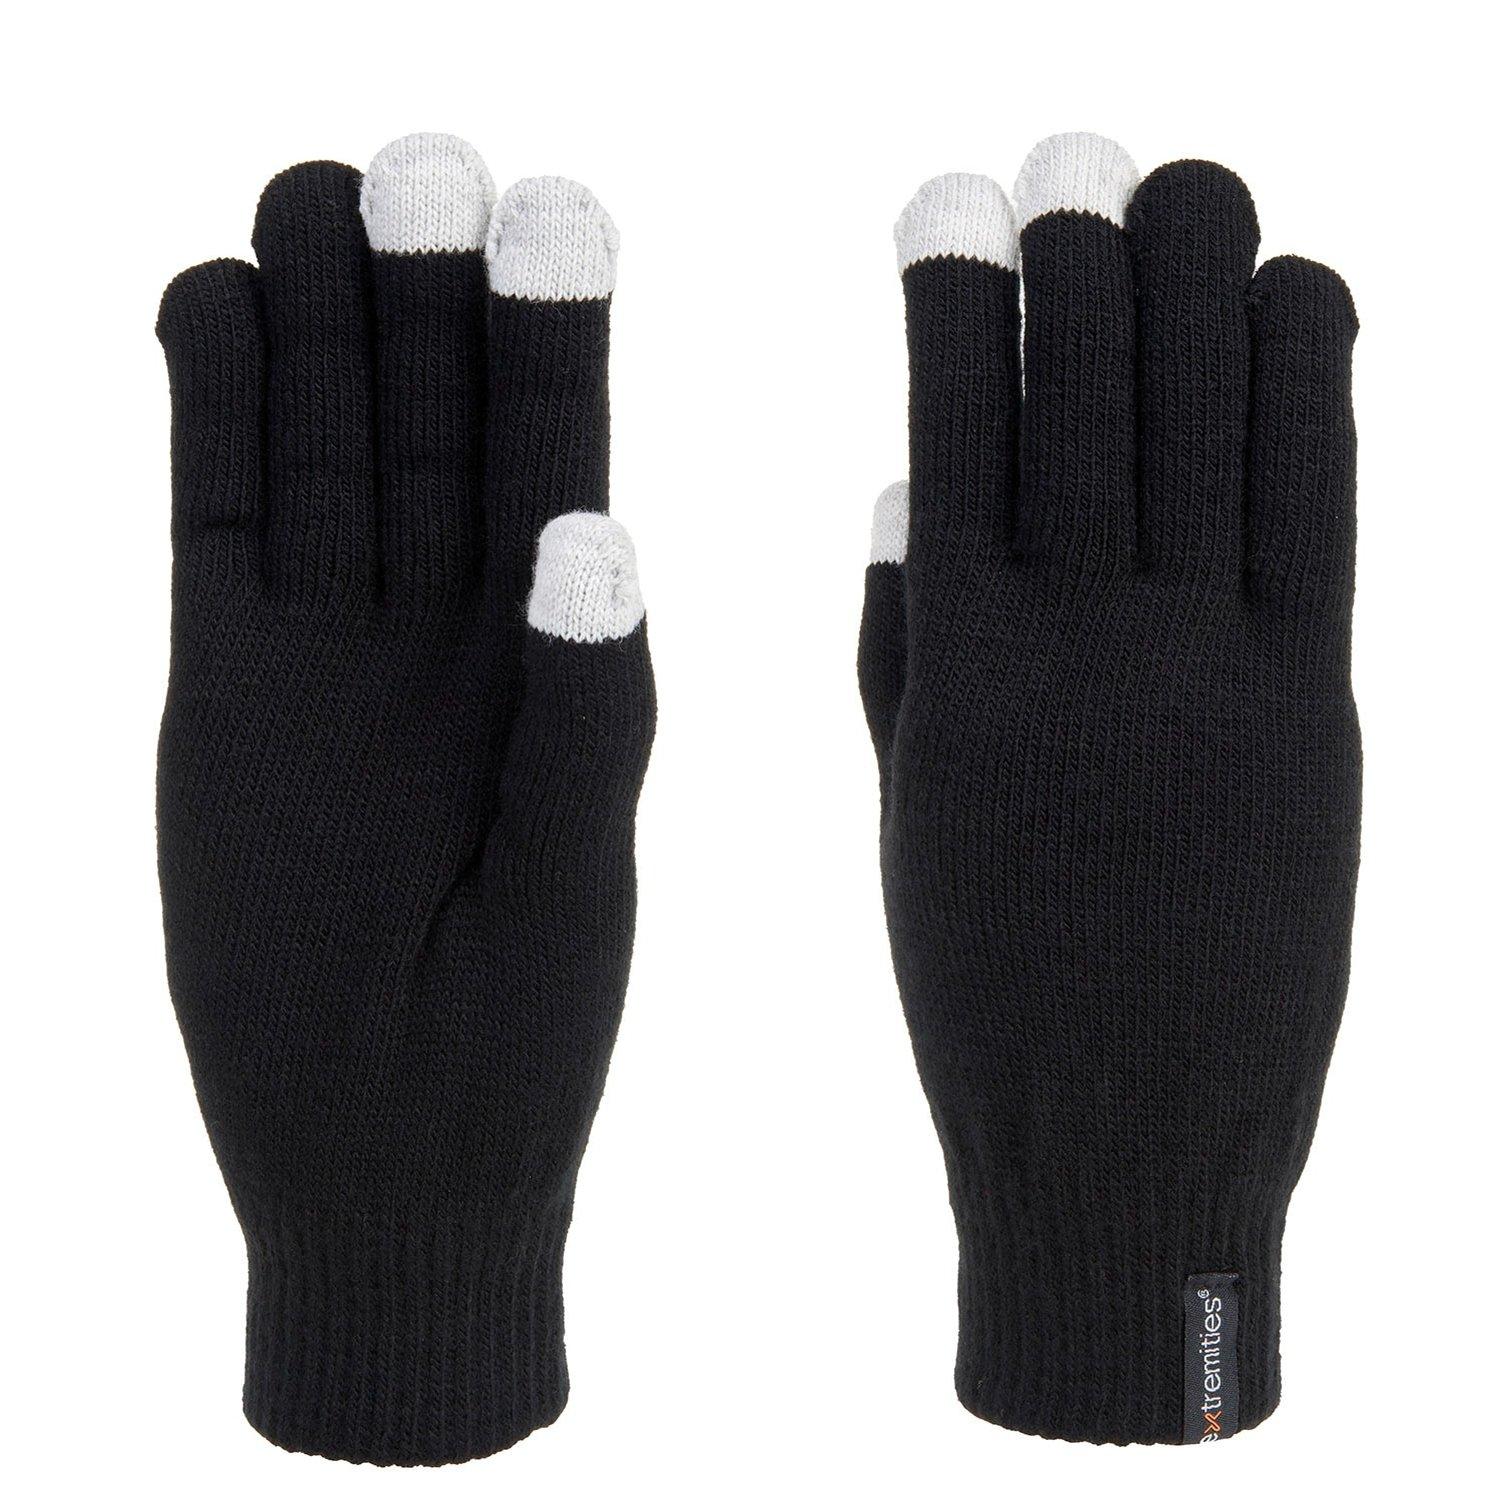 Extremities Thinny Touch Gloves, Touchscreen Gloves